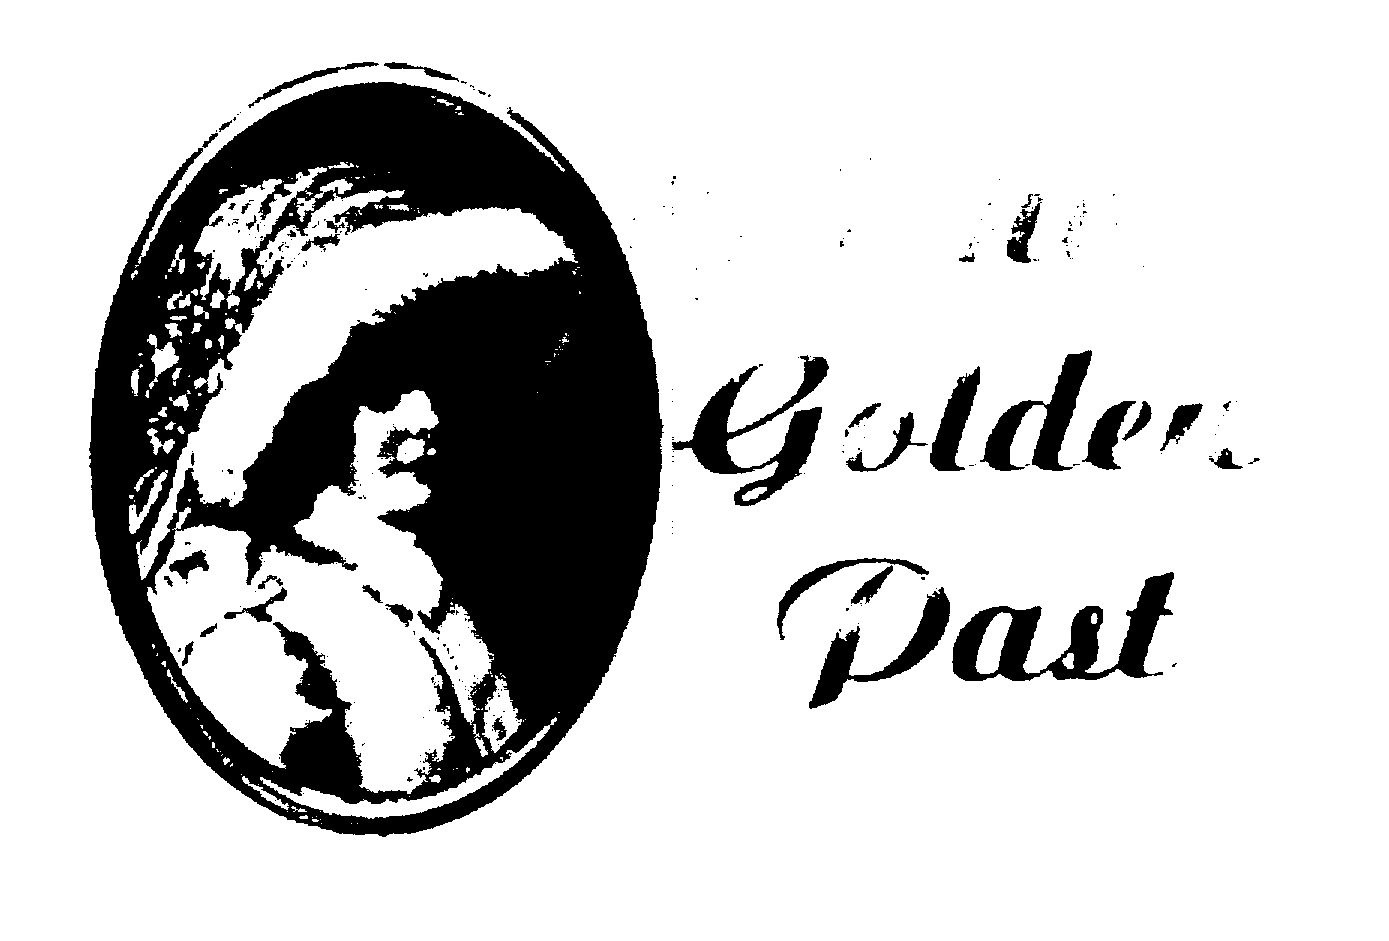  THE GOLDEN PAST